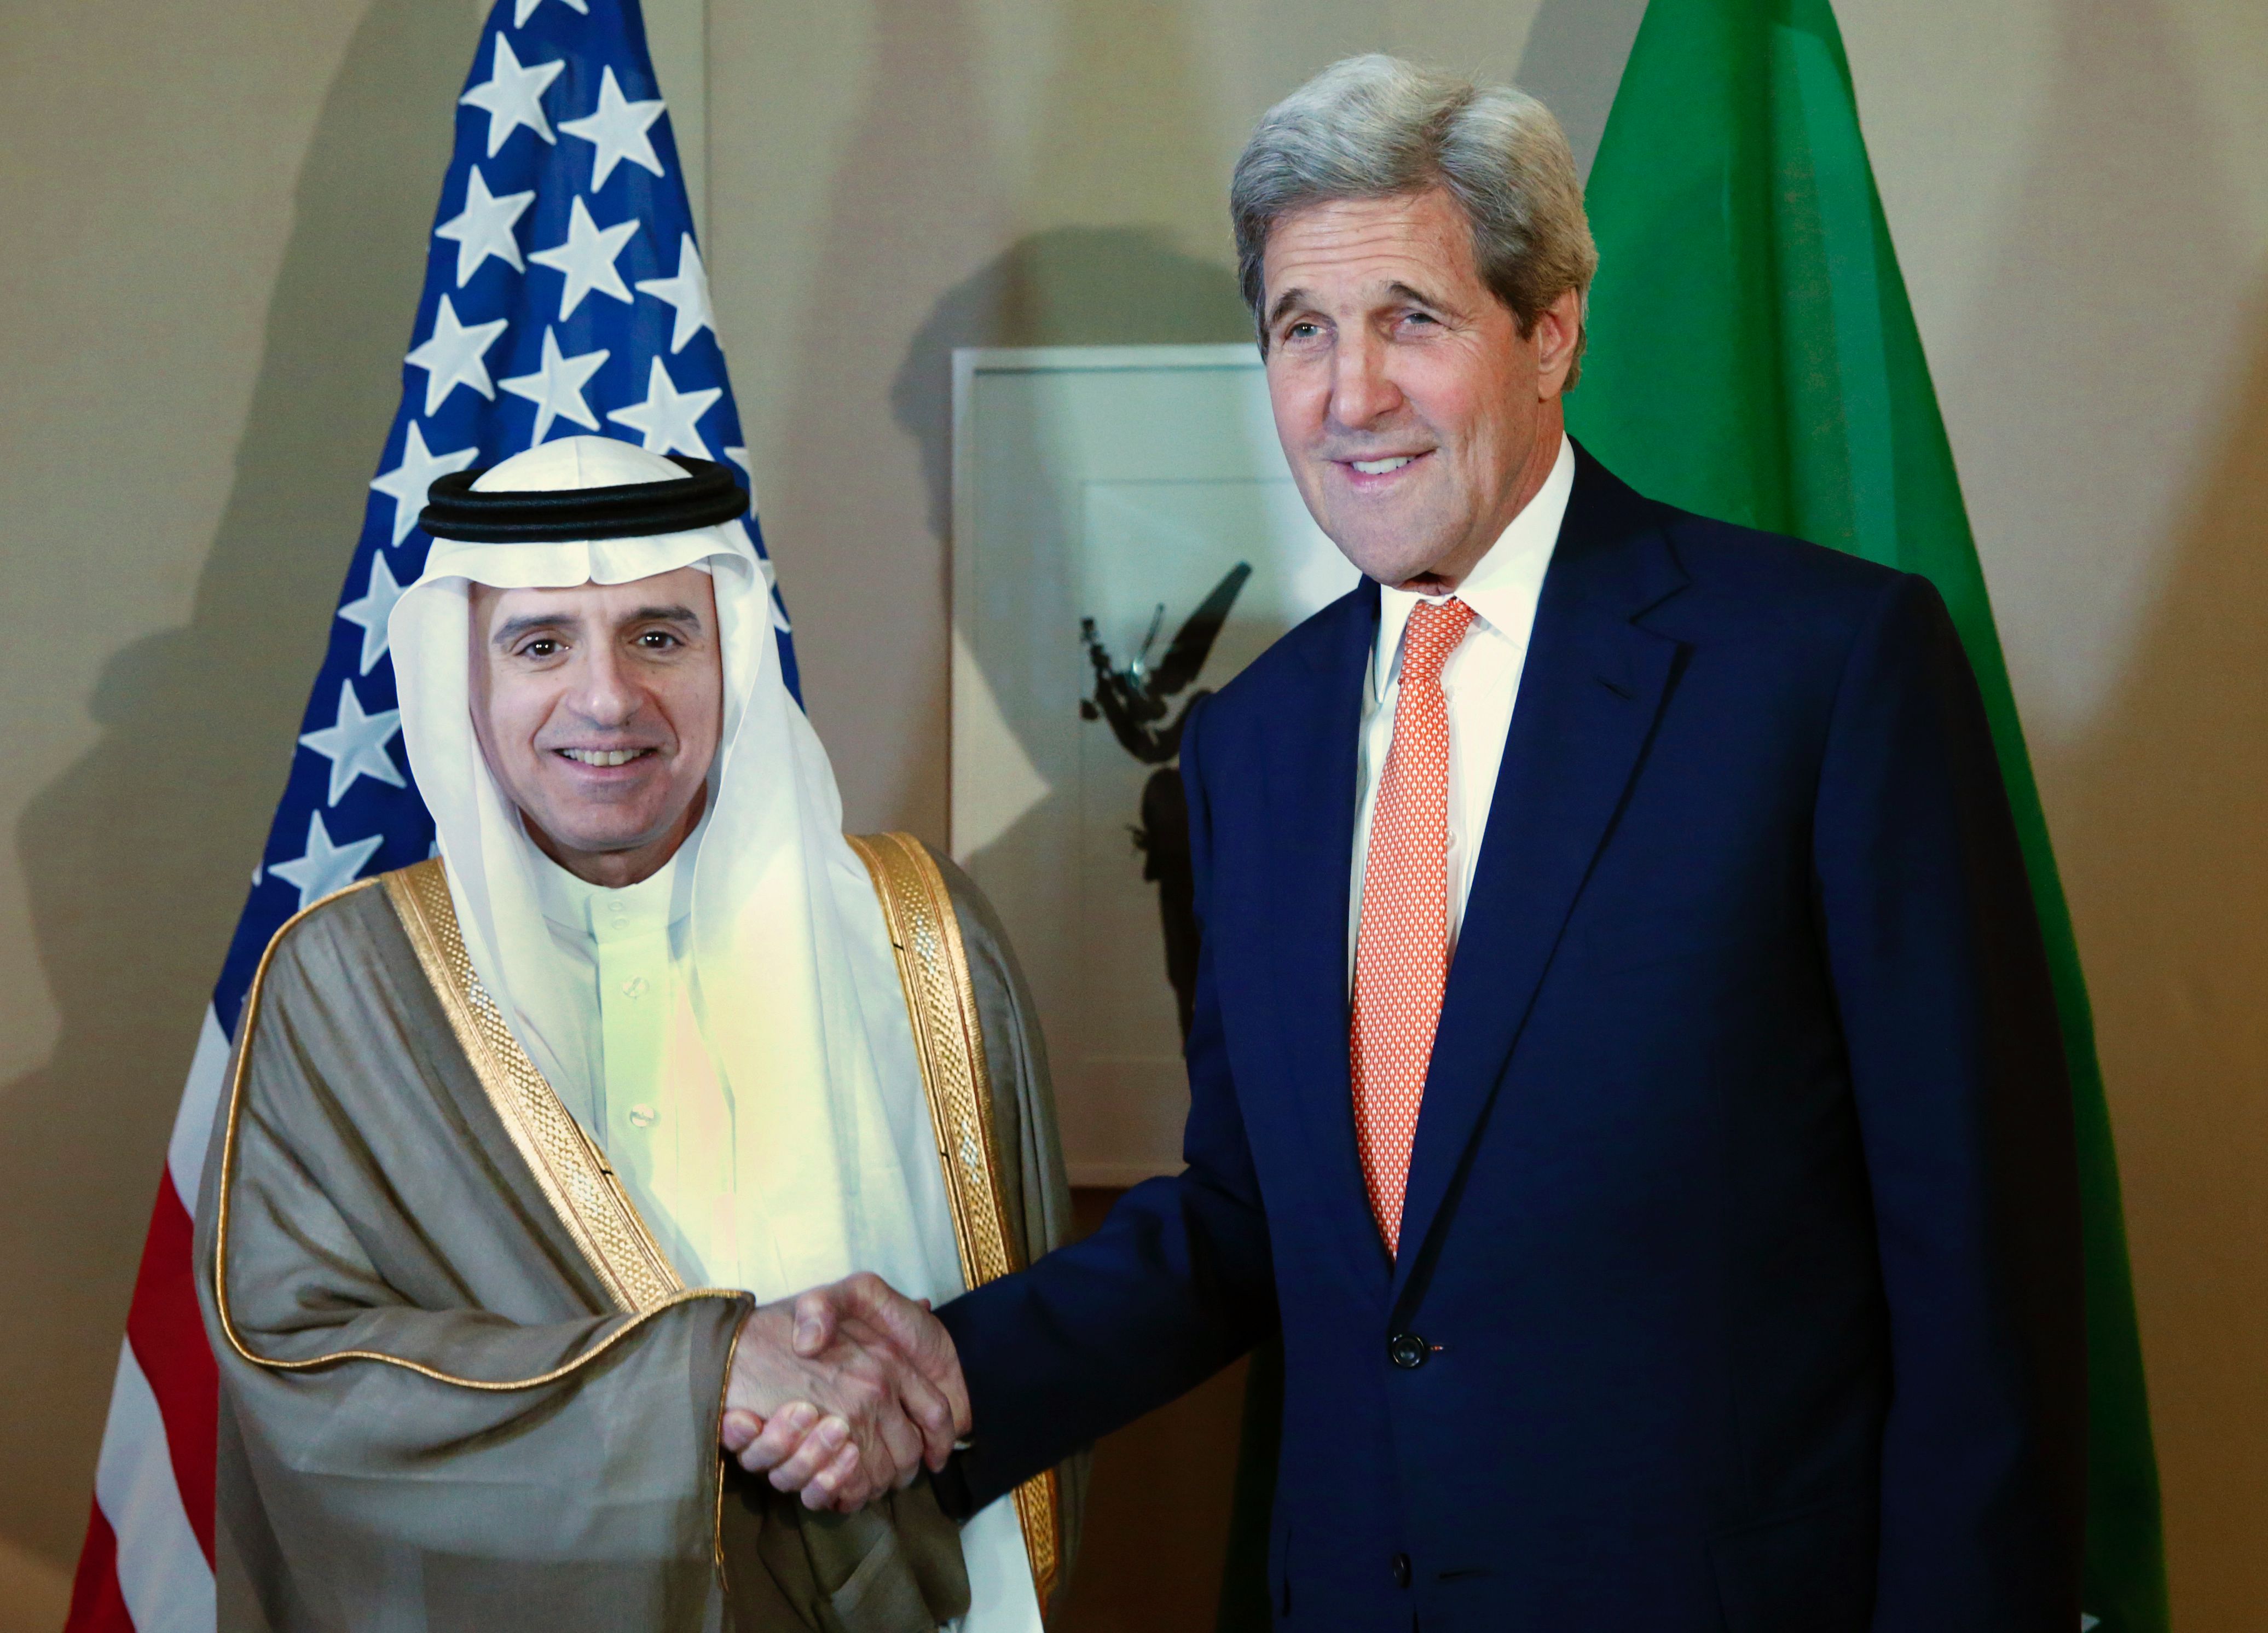 Saudi Foreign Minister Adel al-Jubeir shakes hand with US Secretary of State John Kerry during a meeting on Syria in Geneva, on May 2, 2016. (DENIS BALIBOUSE&mdash;AFP/Getty Images)